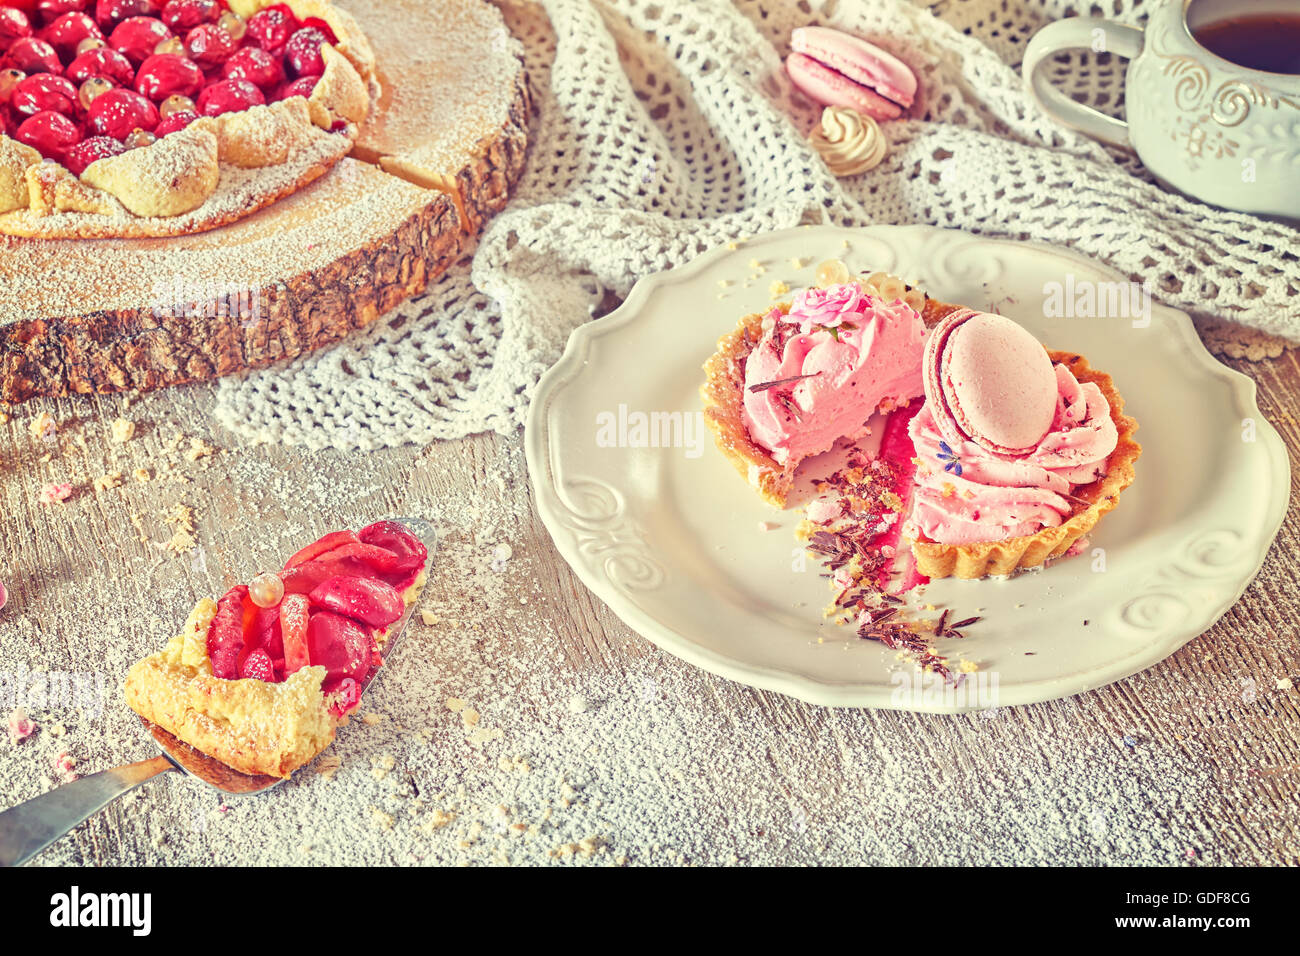 Retro toned rustic set of fruit tarts and meringues, homemade pastry, pastel colors. Stock Photo